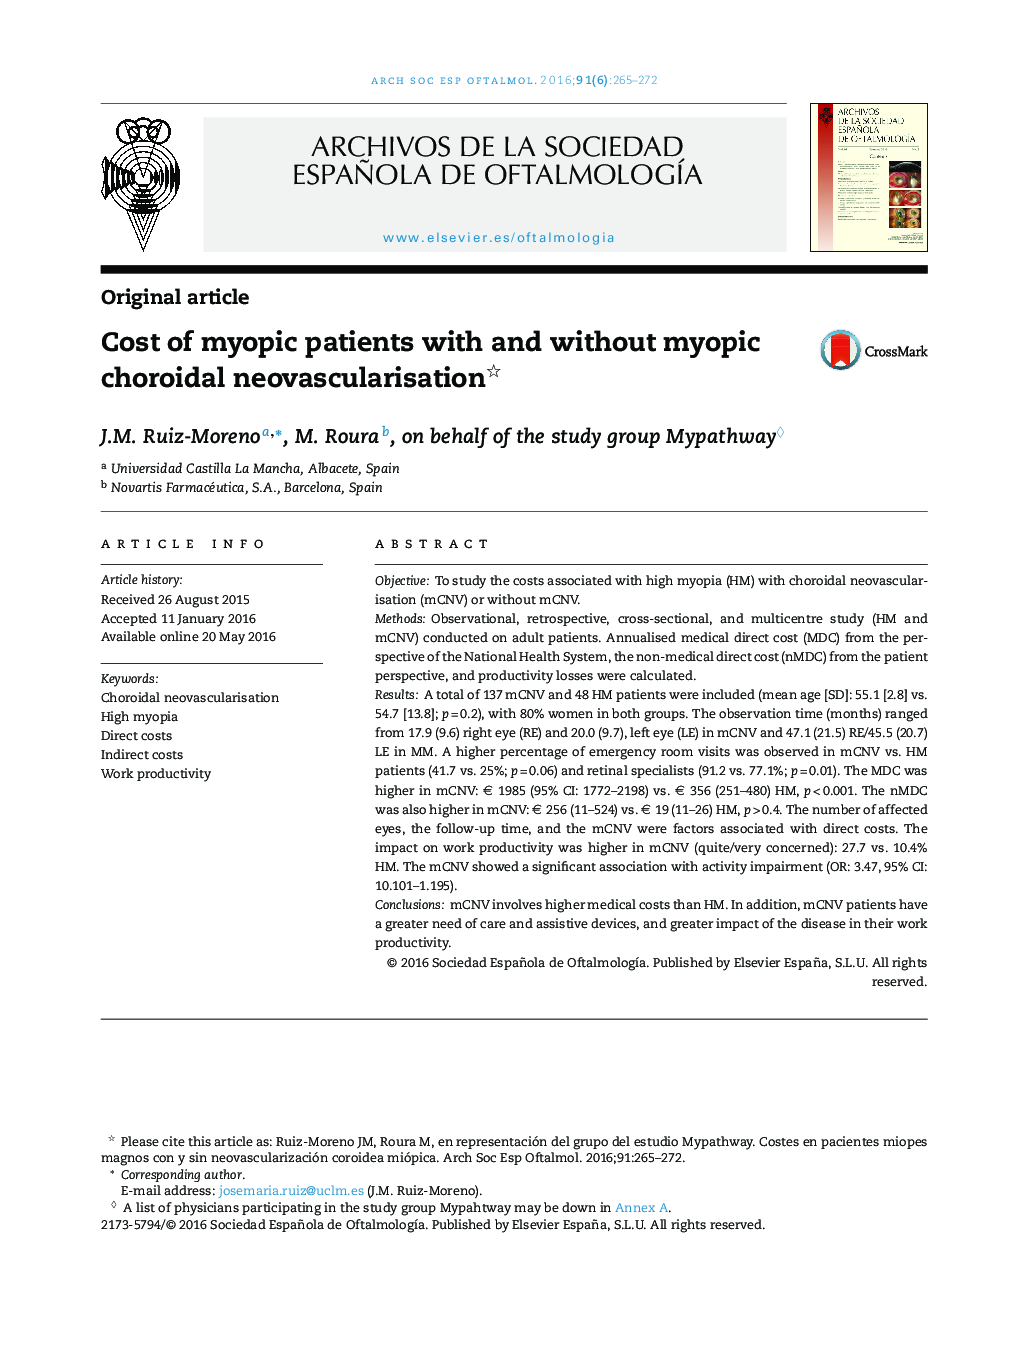 Cost of myopic patients with and without myopic choroidal neovascularisation